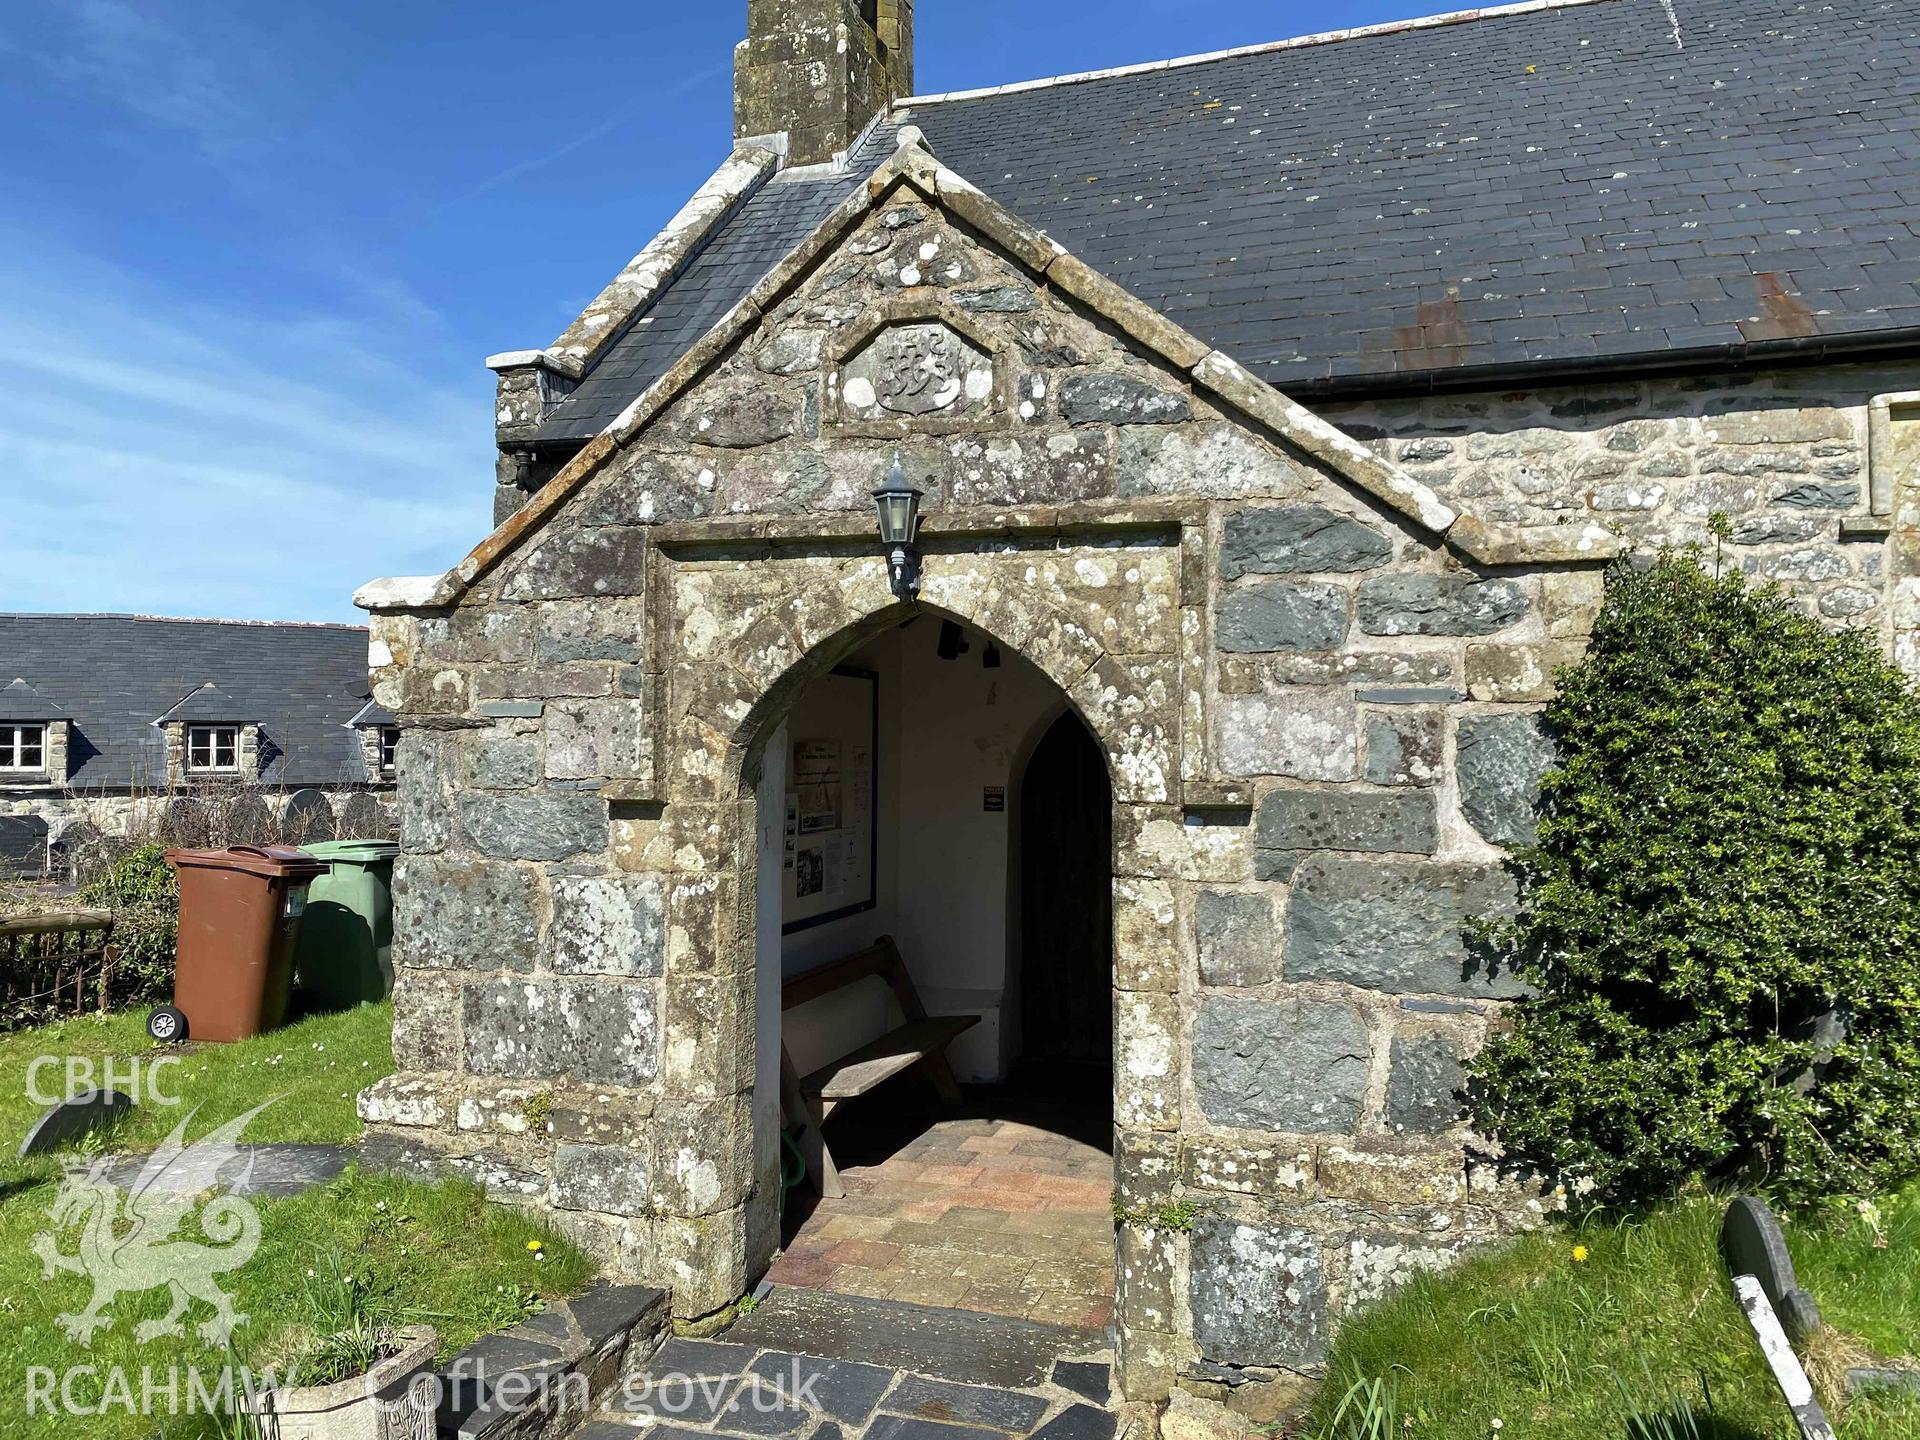 Digital photograph showing detailed view of porch at St Dwywe's Church, Llanddwywe-Is-y-Craig, produced by Paul Davis in 2023